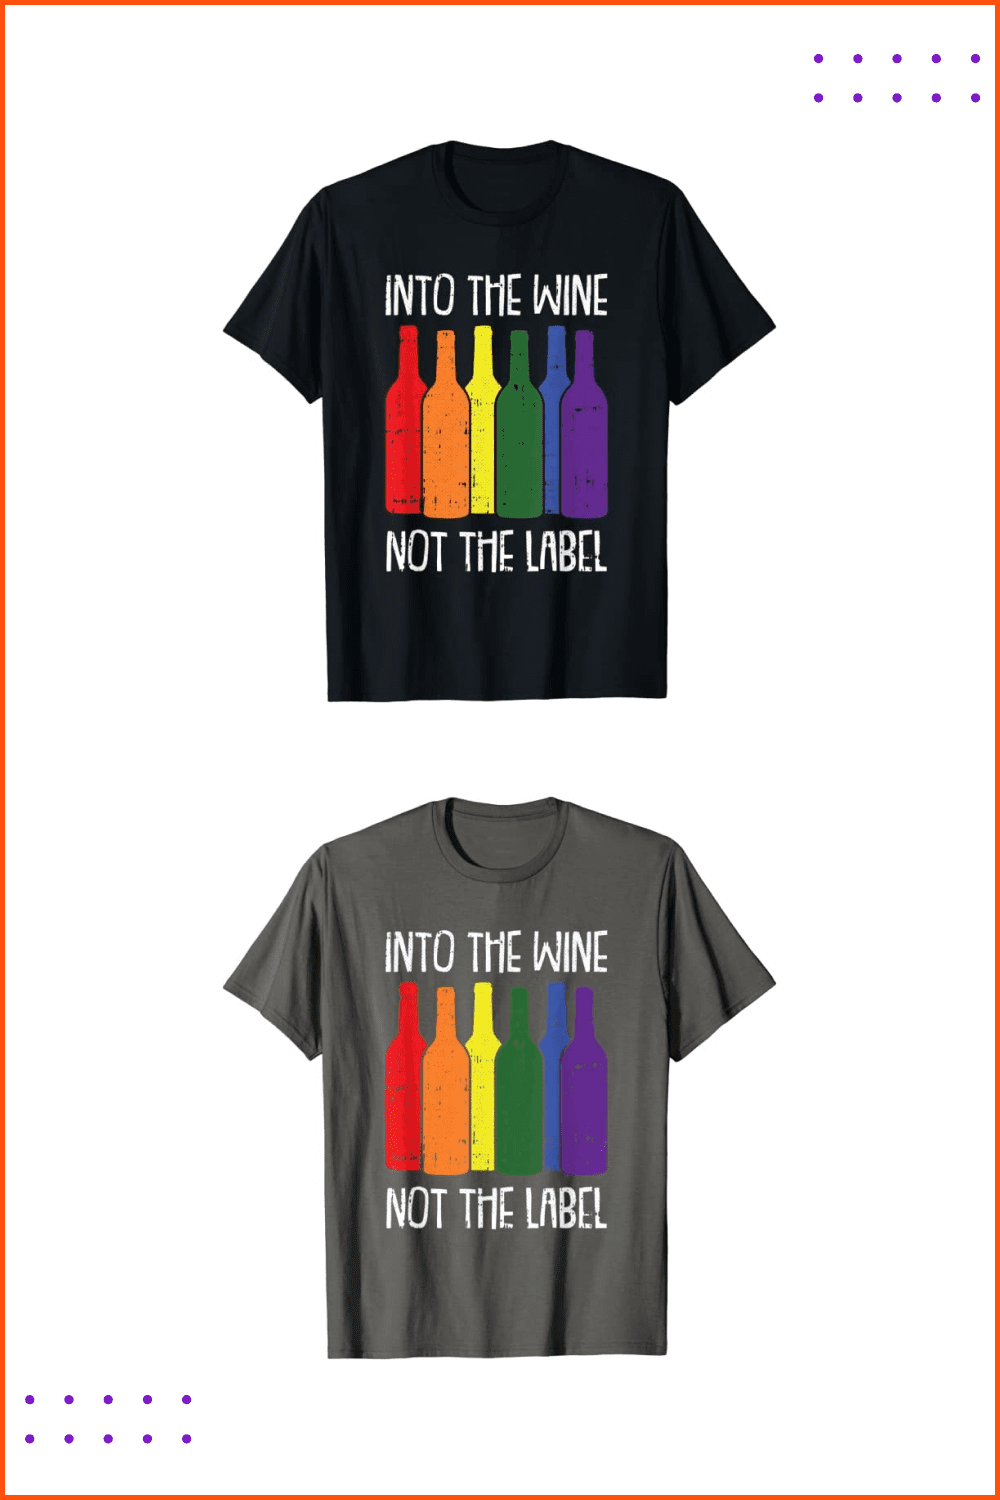 Black t-shirt with bottles of wine in rainbow colors.